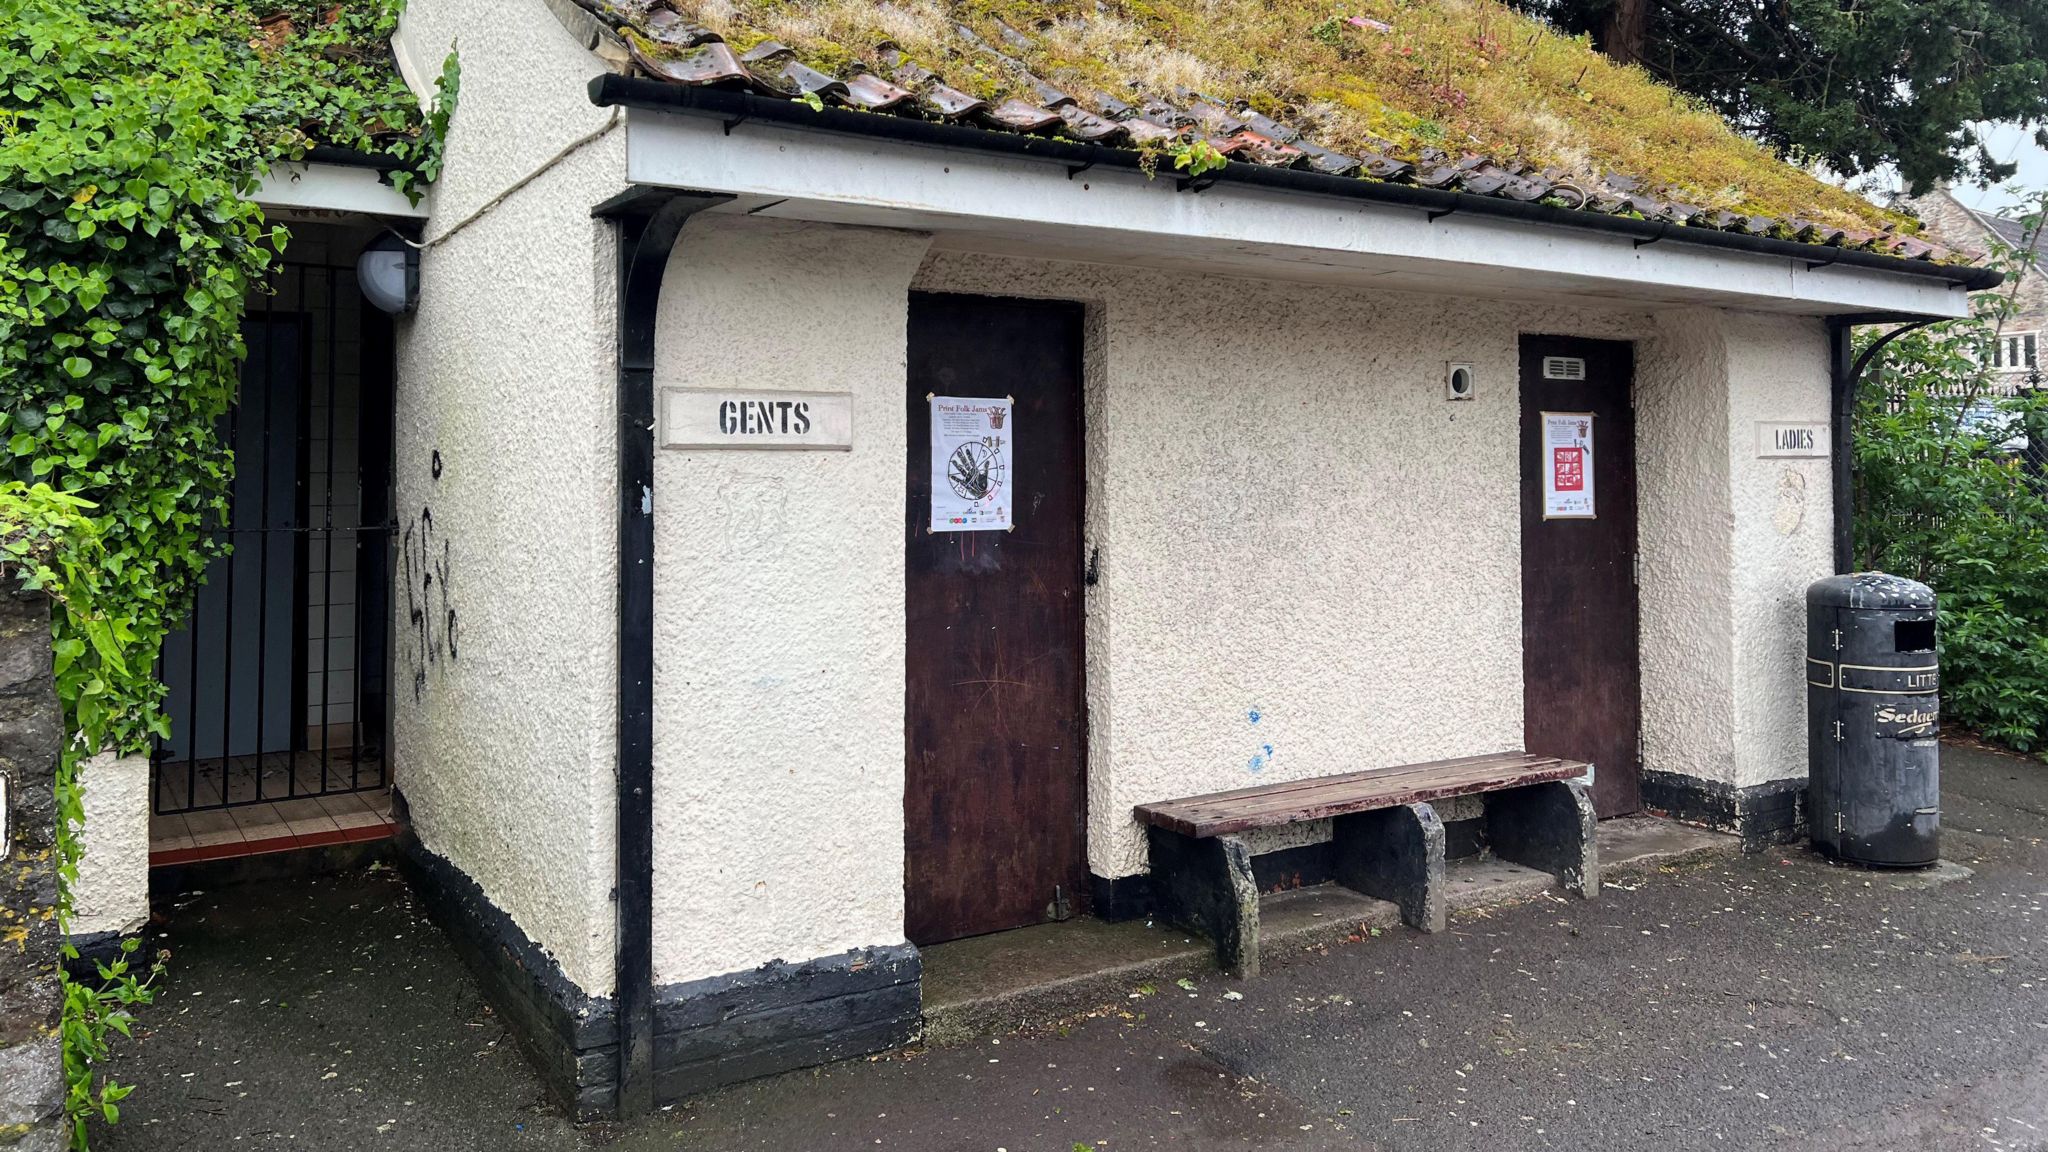 Public toilet block with Gents and Ladies sign